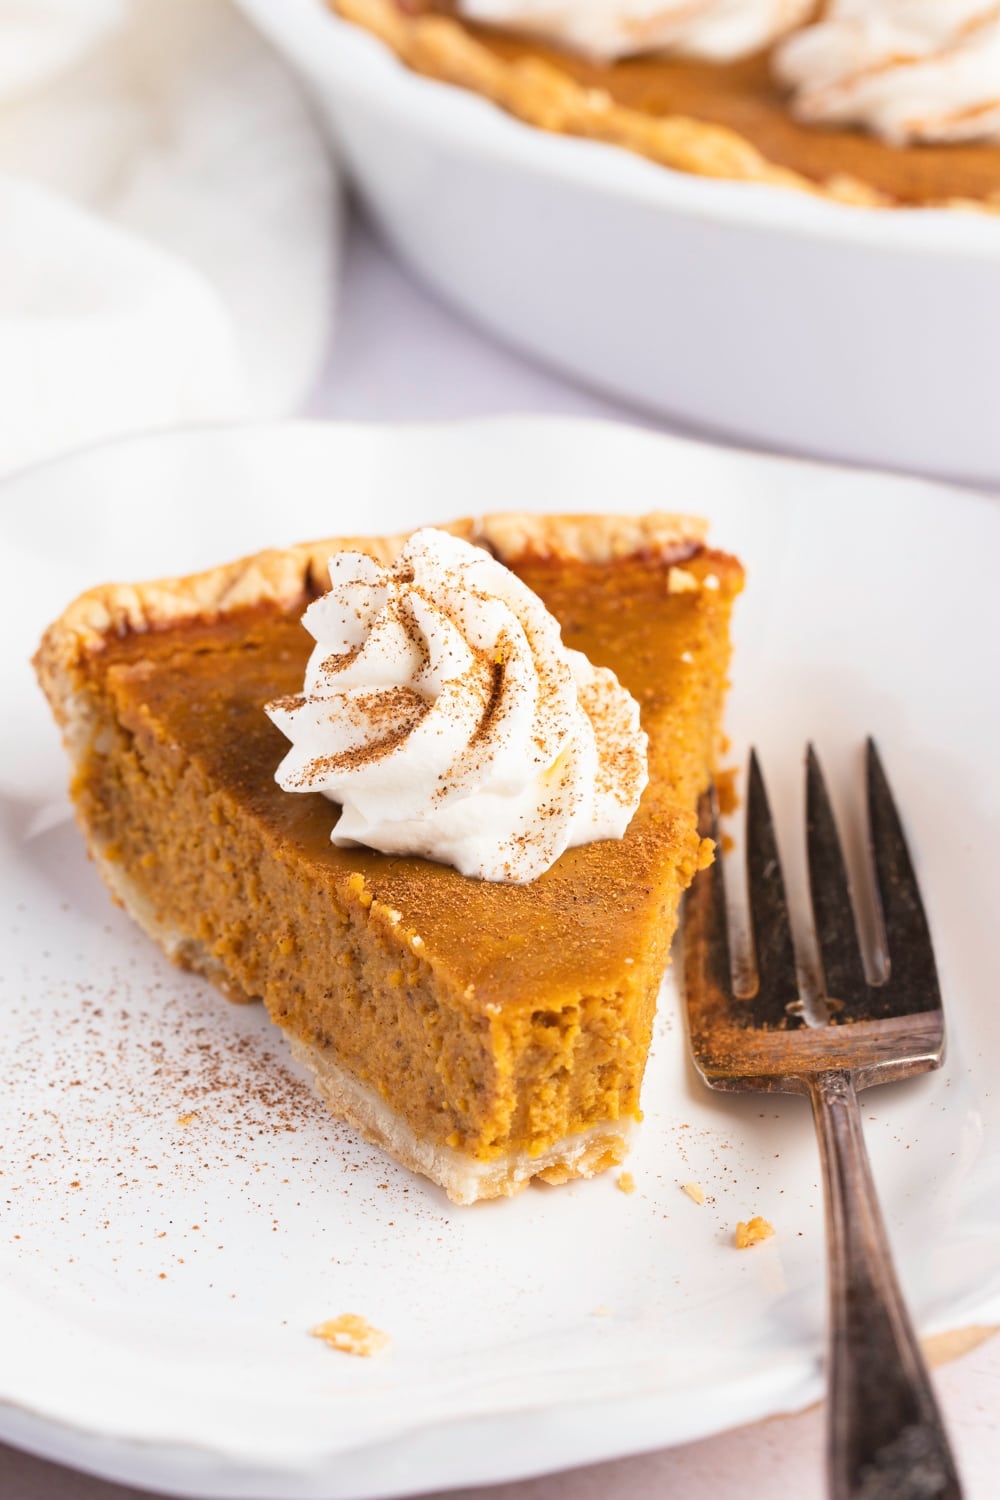 A slice of Libby's pumpkin pie with cream on top served on a white plate.